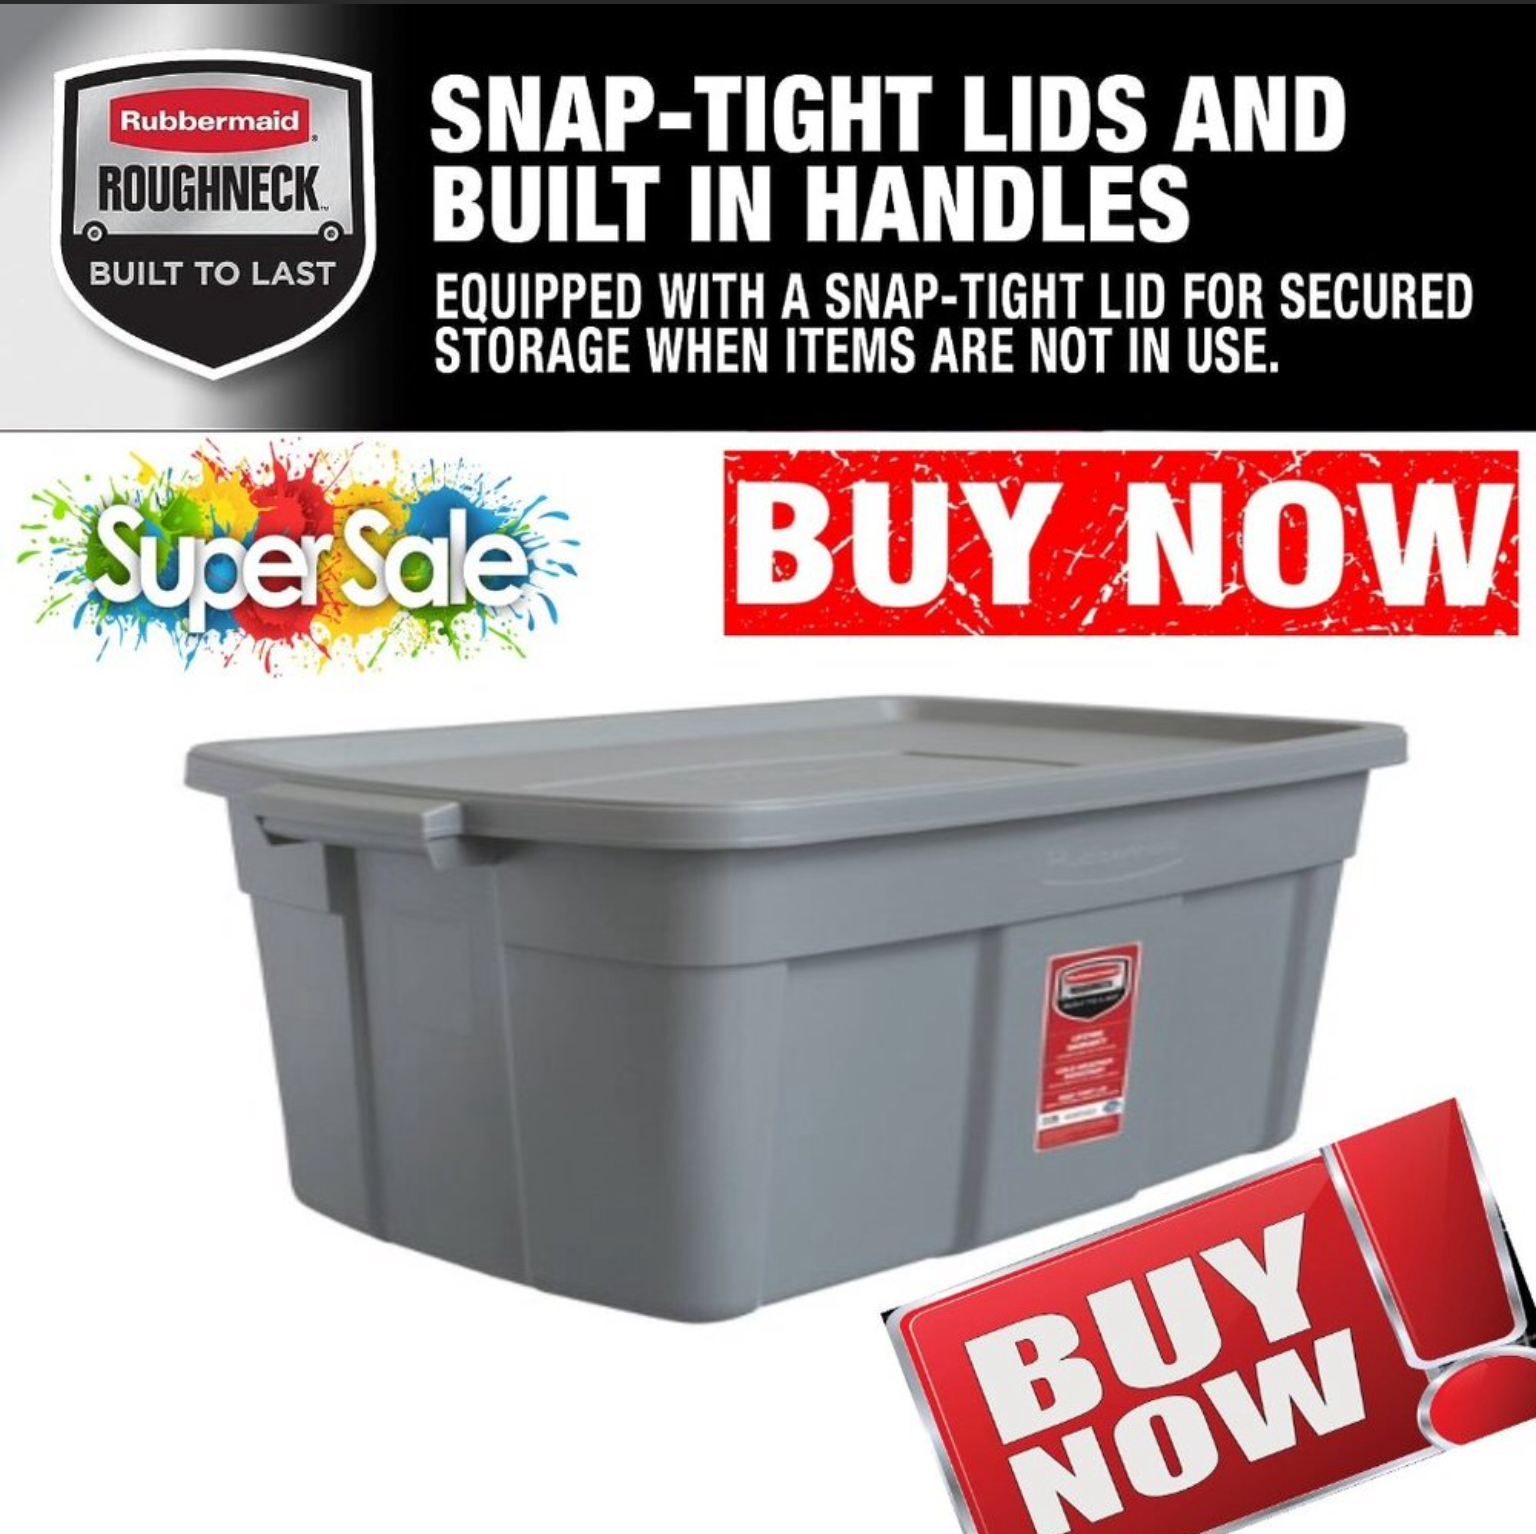 ??RUBBERMAID Roughneck CARRY BOX Snap STORAGE BOX 31 Gal TOTE???BUY NOW?? - $29.00